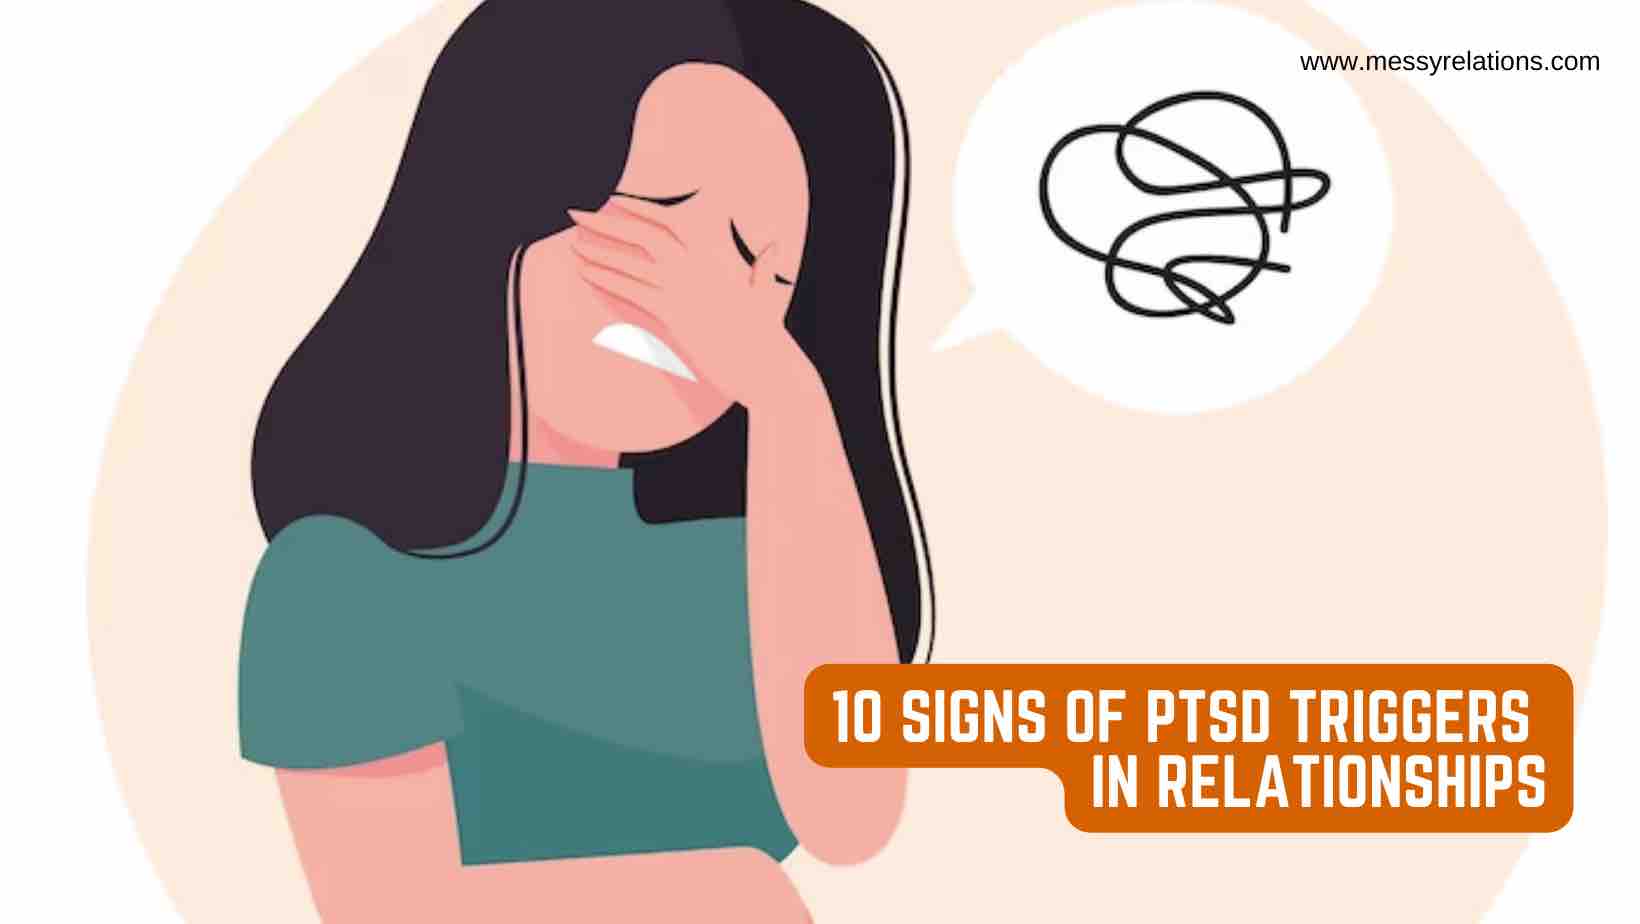 PTSD Triggers in Relationships